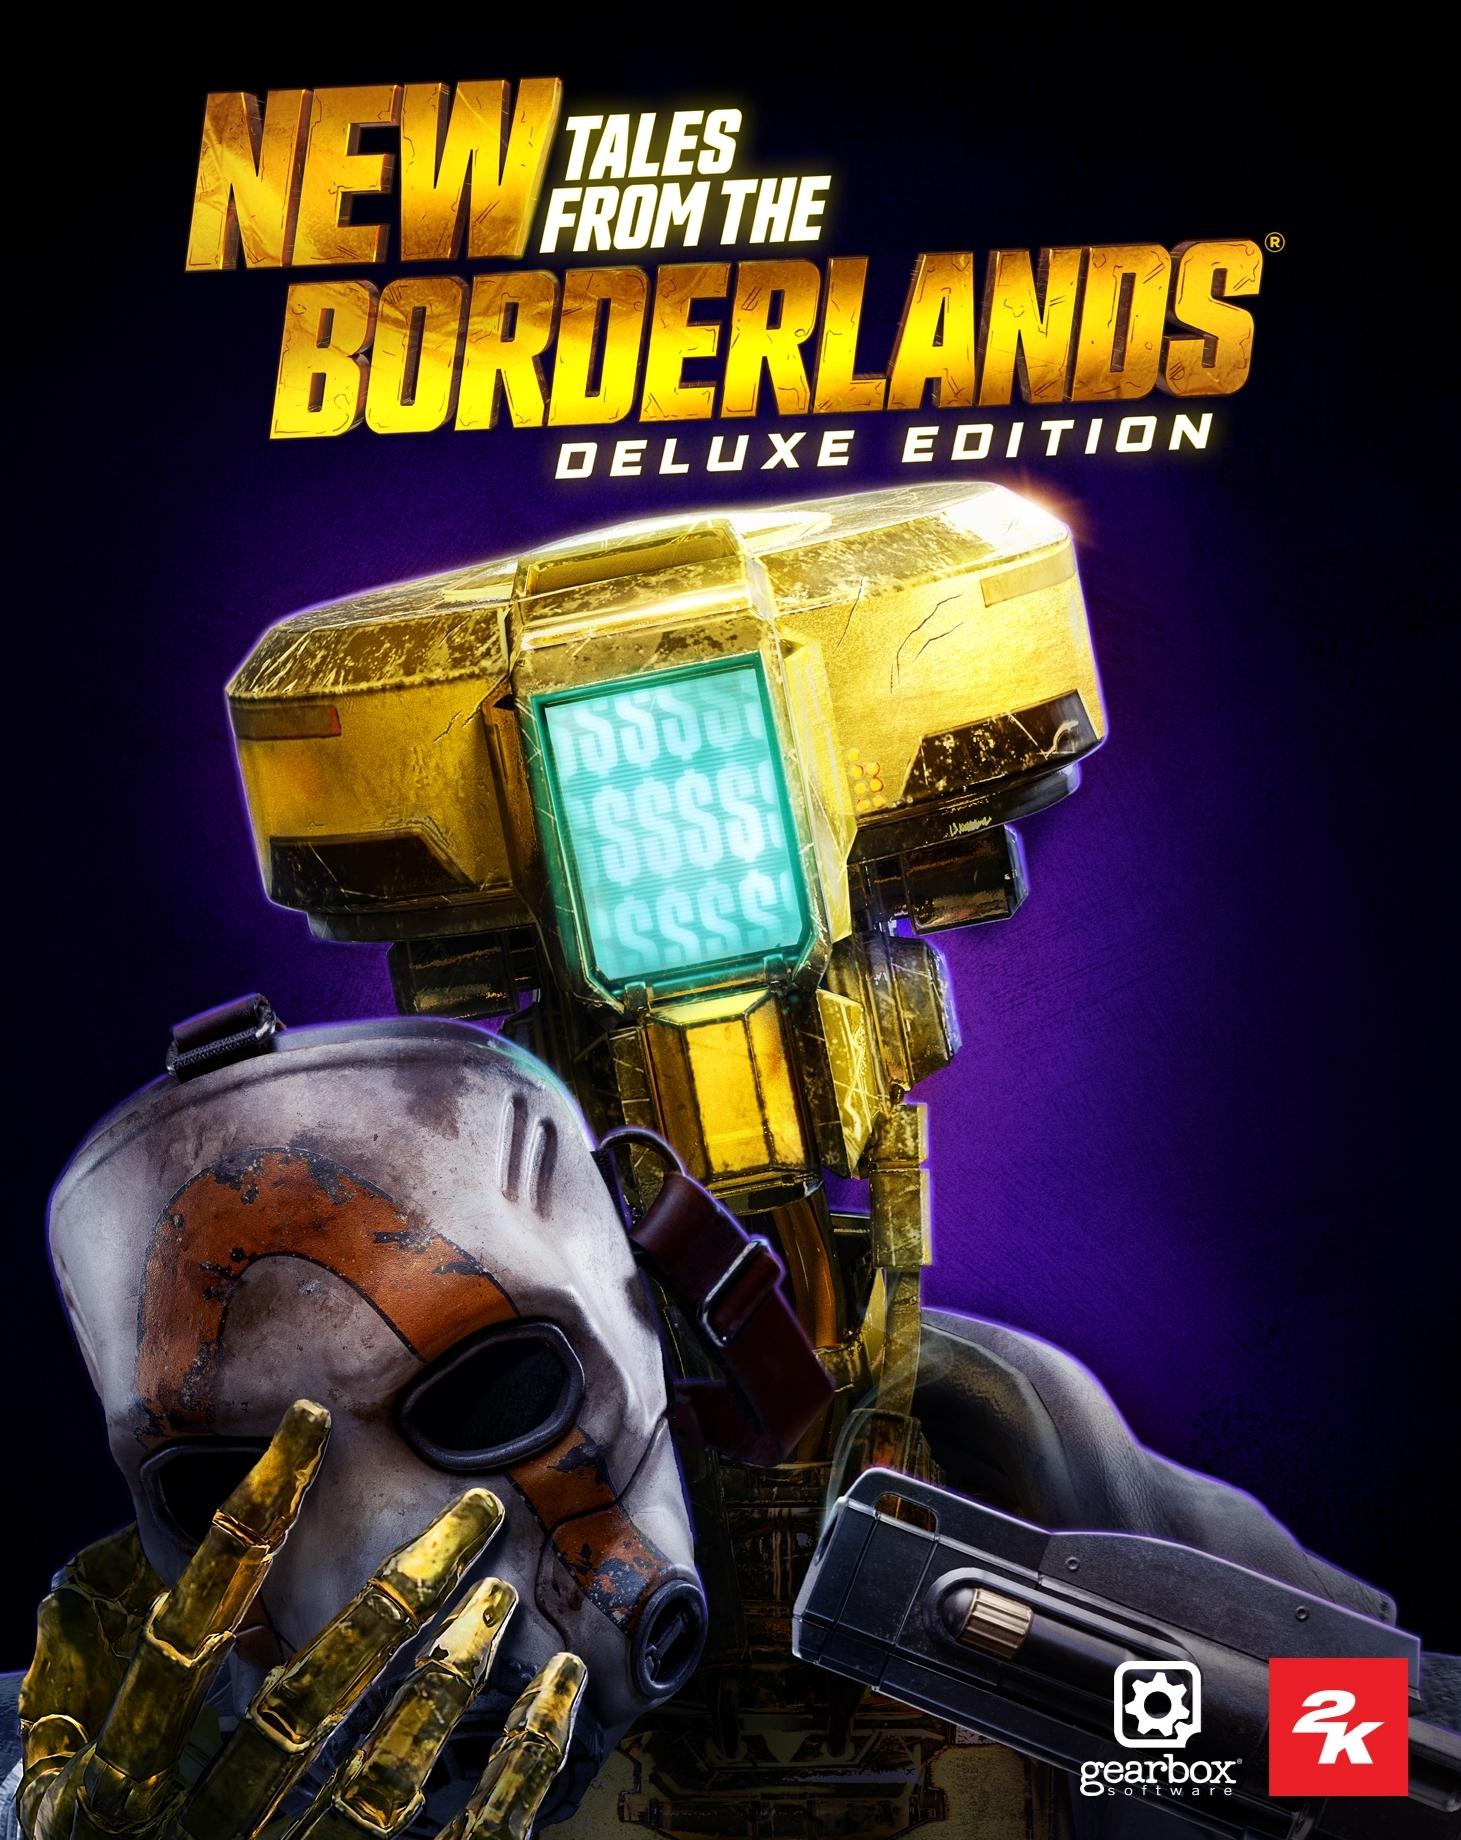 New Tales from the Borderlands: Deluxe Edition (Epic) - Pre Order | ROW (522cd4f8-0cae-4fcb-b92f-88ff51d1799f)